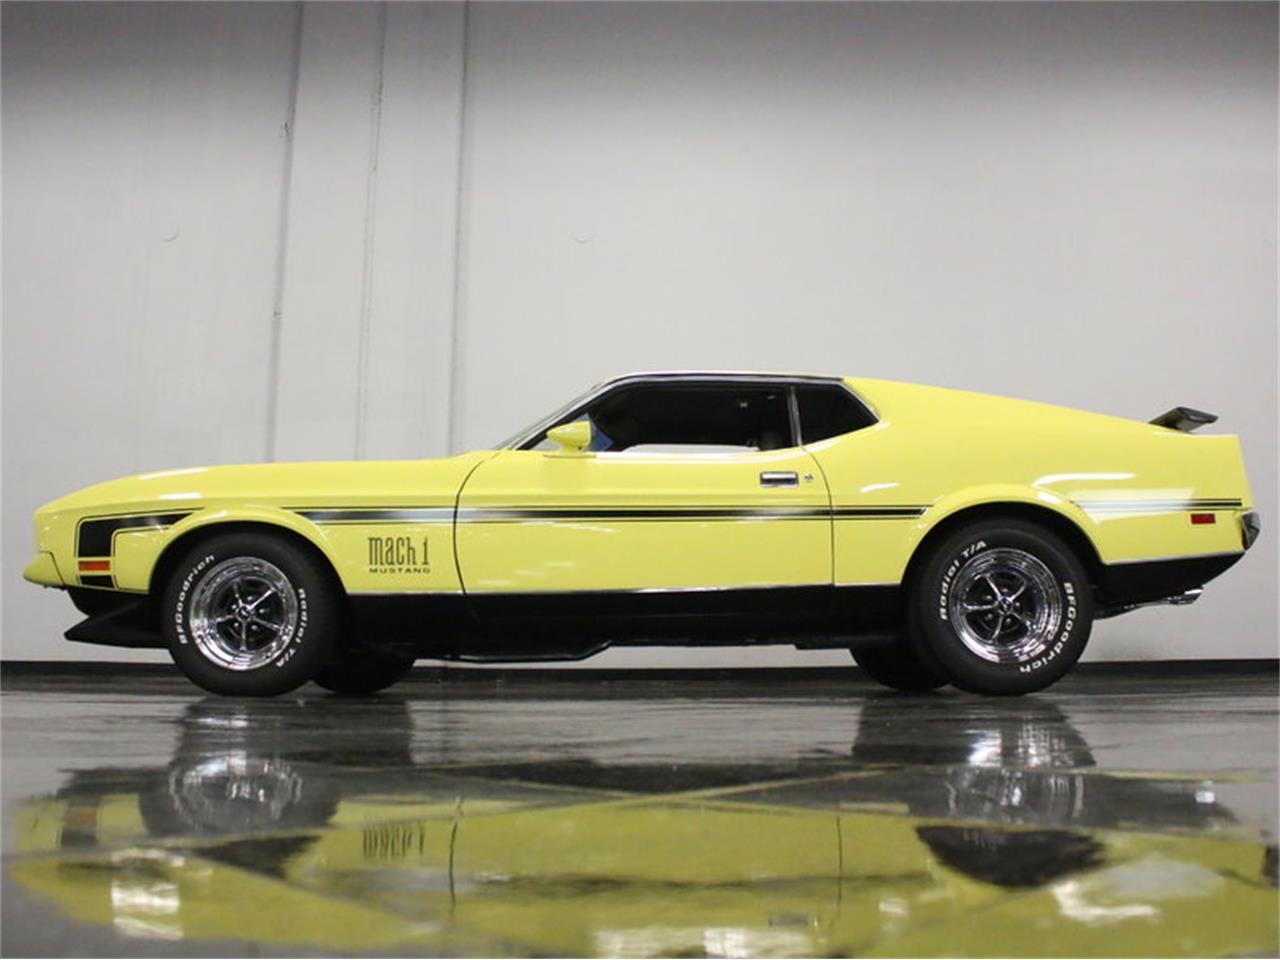 1971 Ford Mustang Mach 1 Cobra Jet for Sale | ClassicCars.com | CC-994764